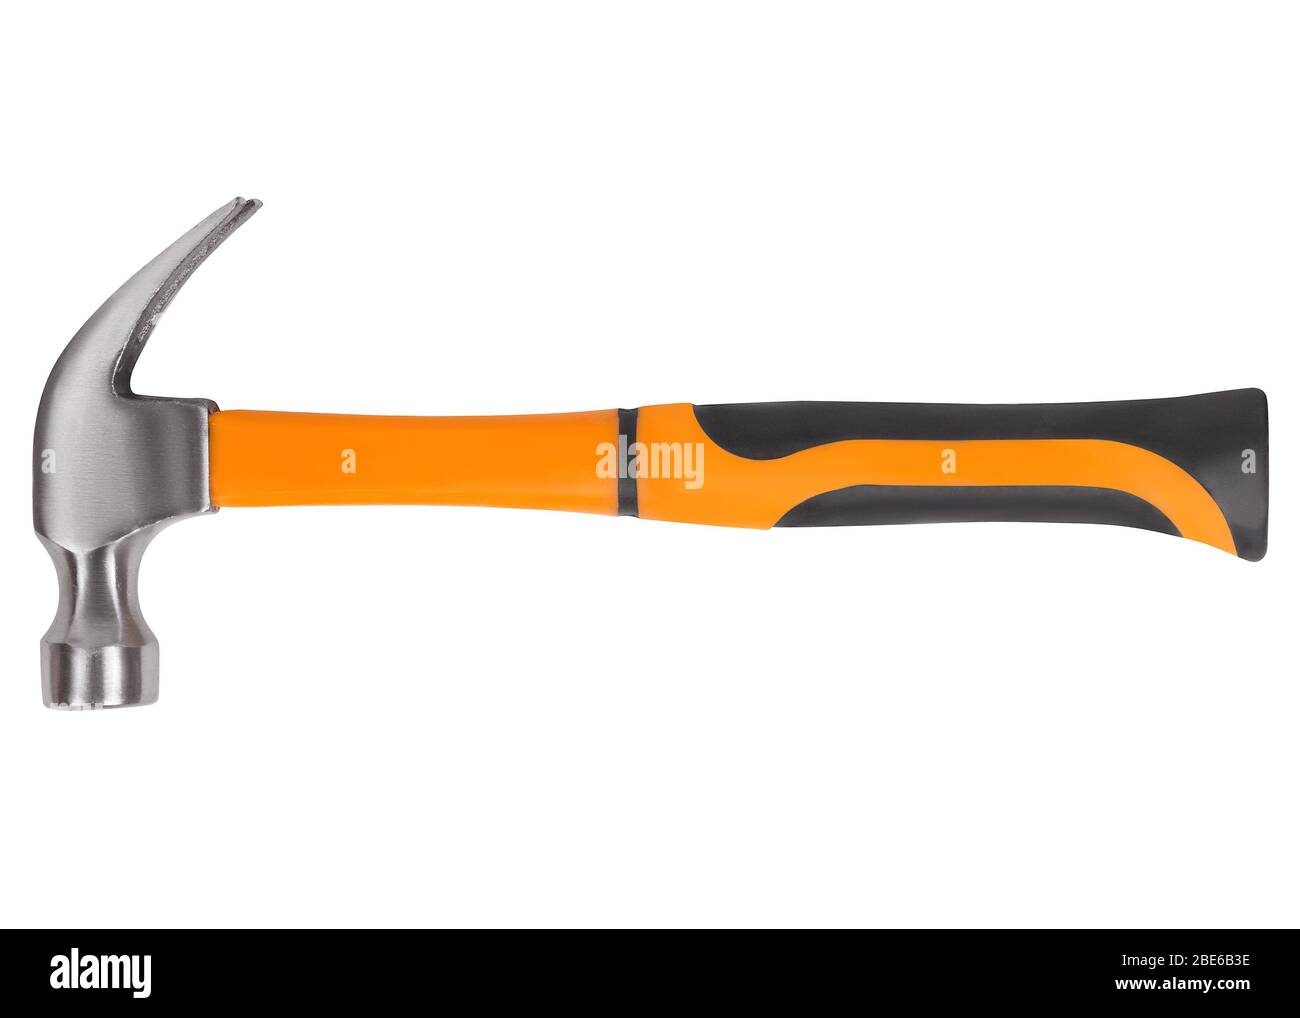 Claw hammer with orange rubber handle isolated on white background Stock Photo